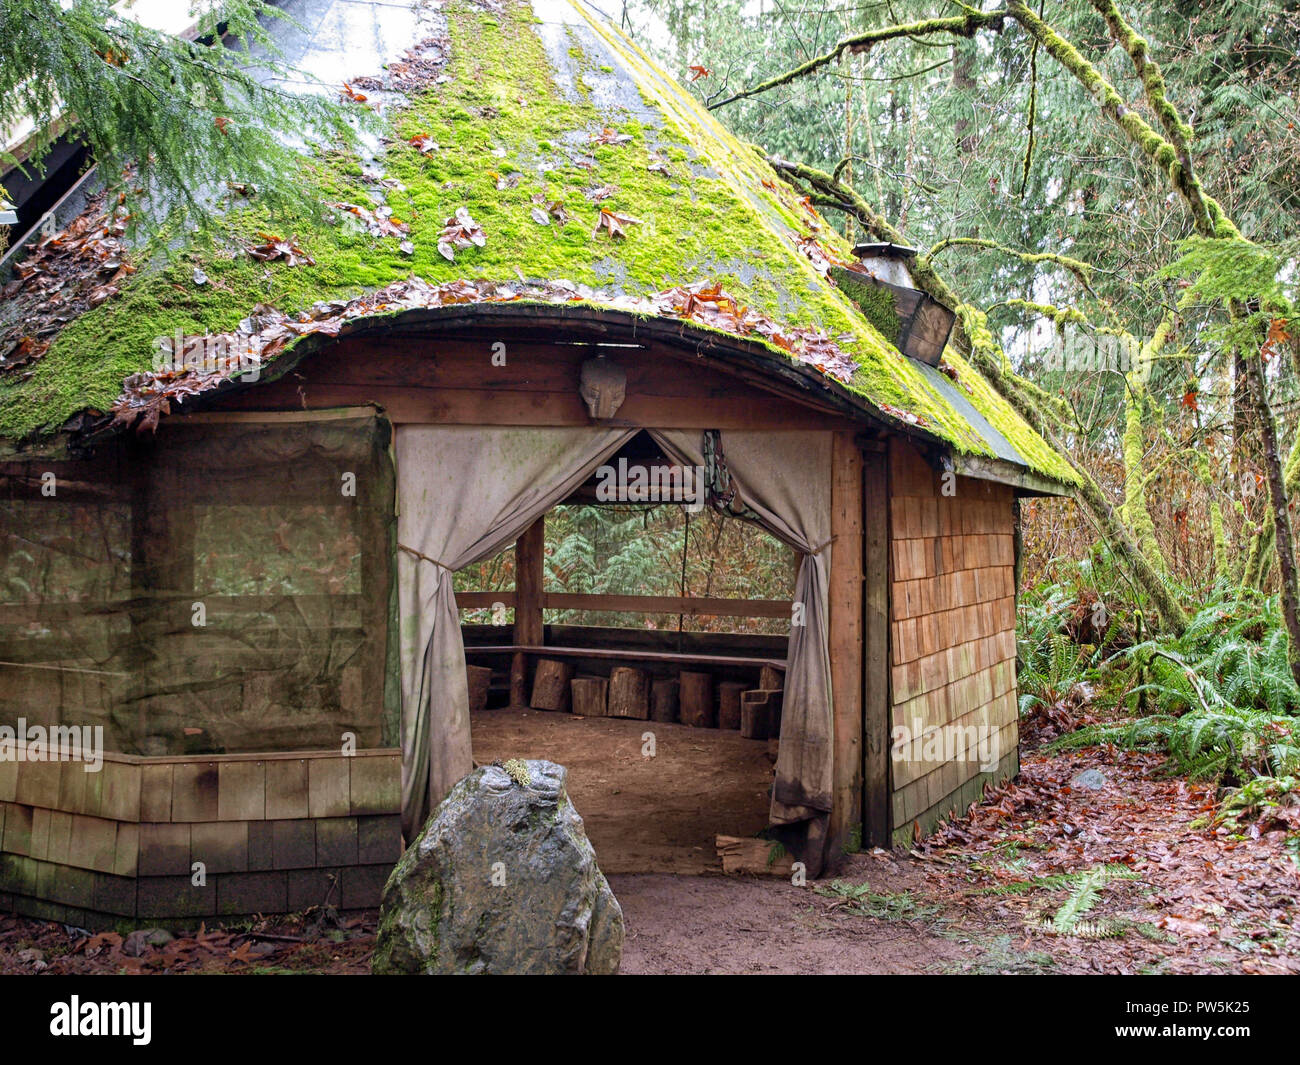 A beautiful little rustic hobbit house in a park in Washington state, USA Stock Photo